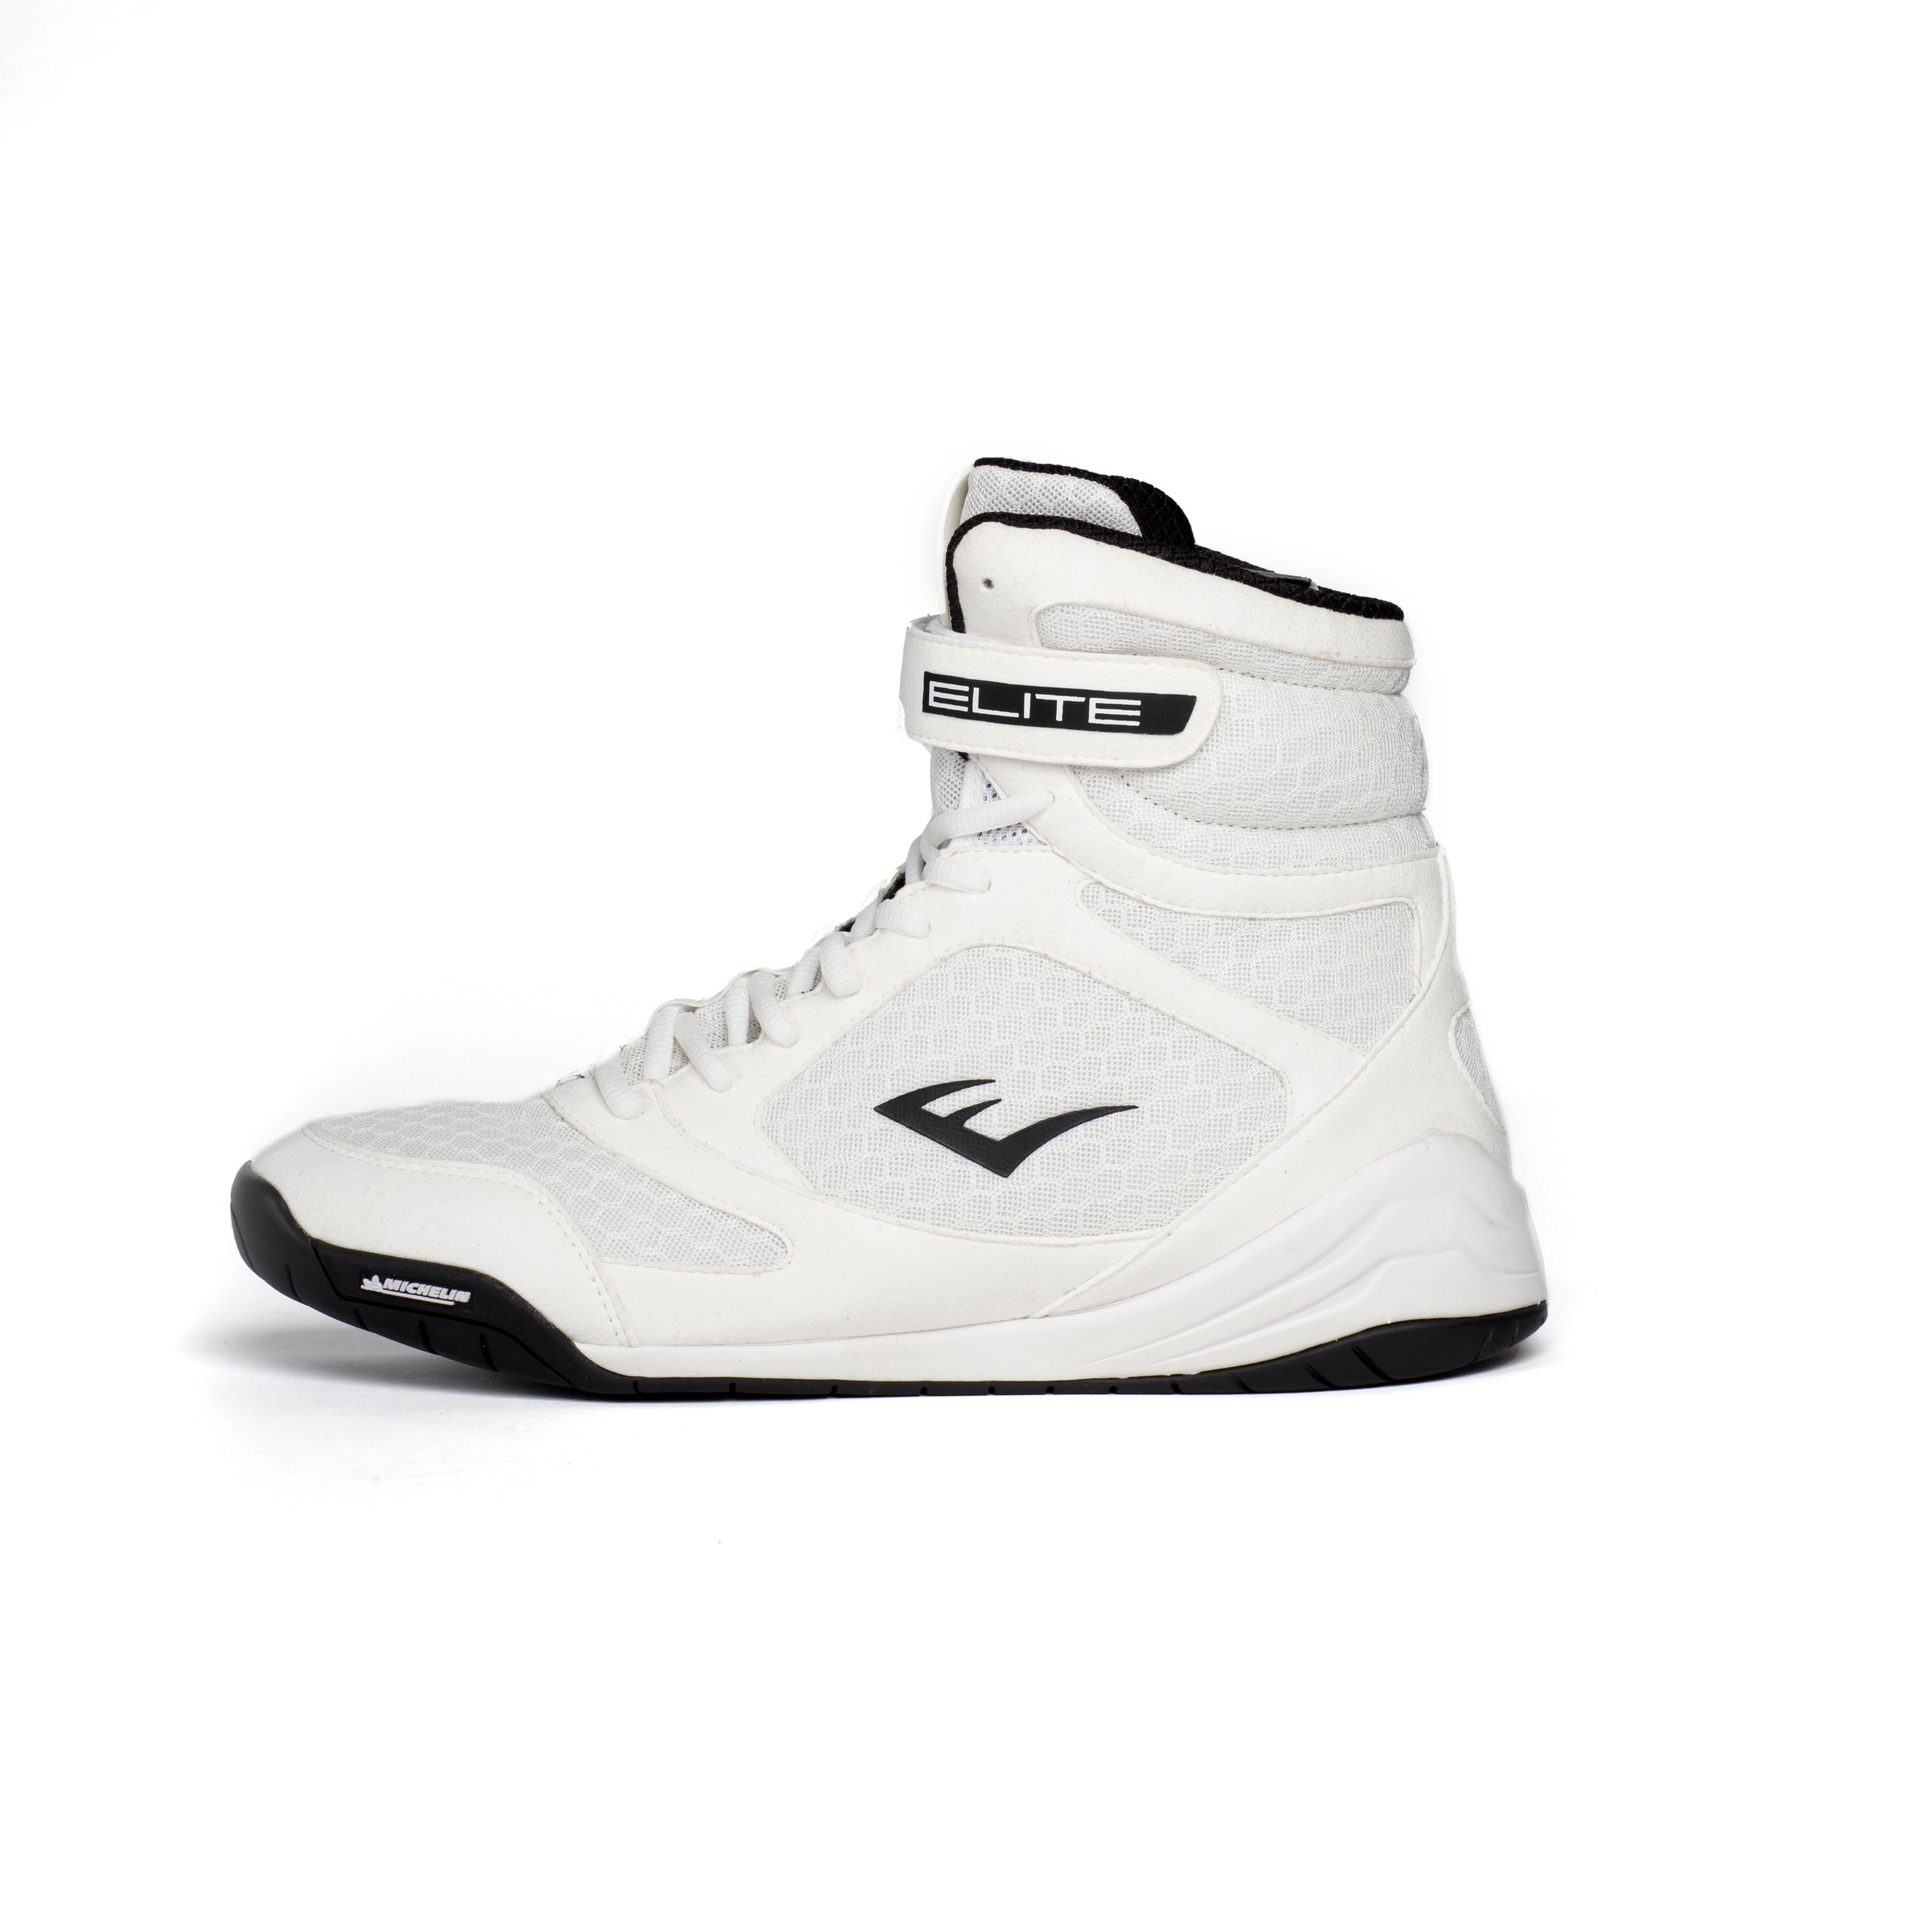 Everlast Elite 2.0 High Top Boxing Shoes WHITE – FIGHT 2 FINISH